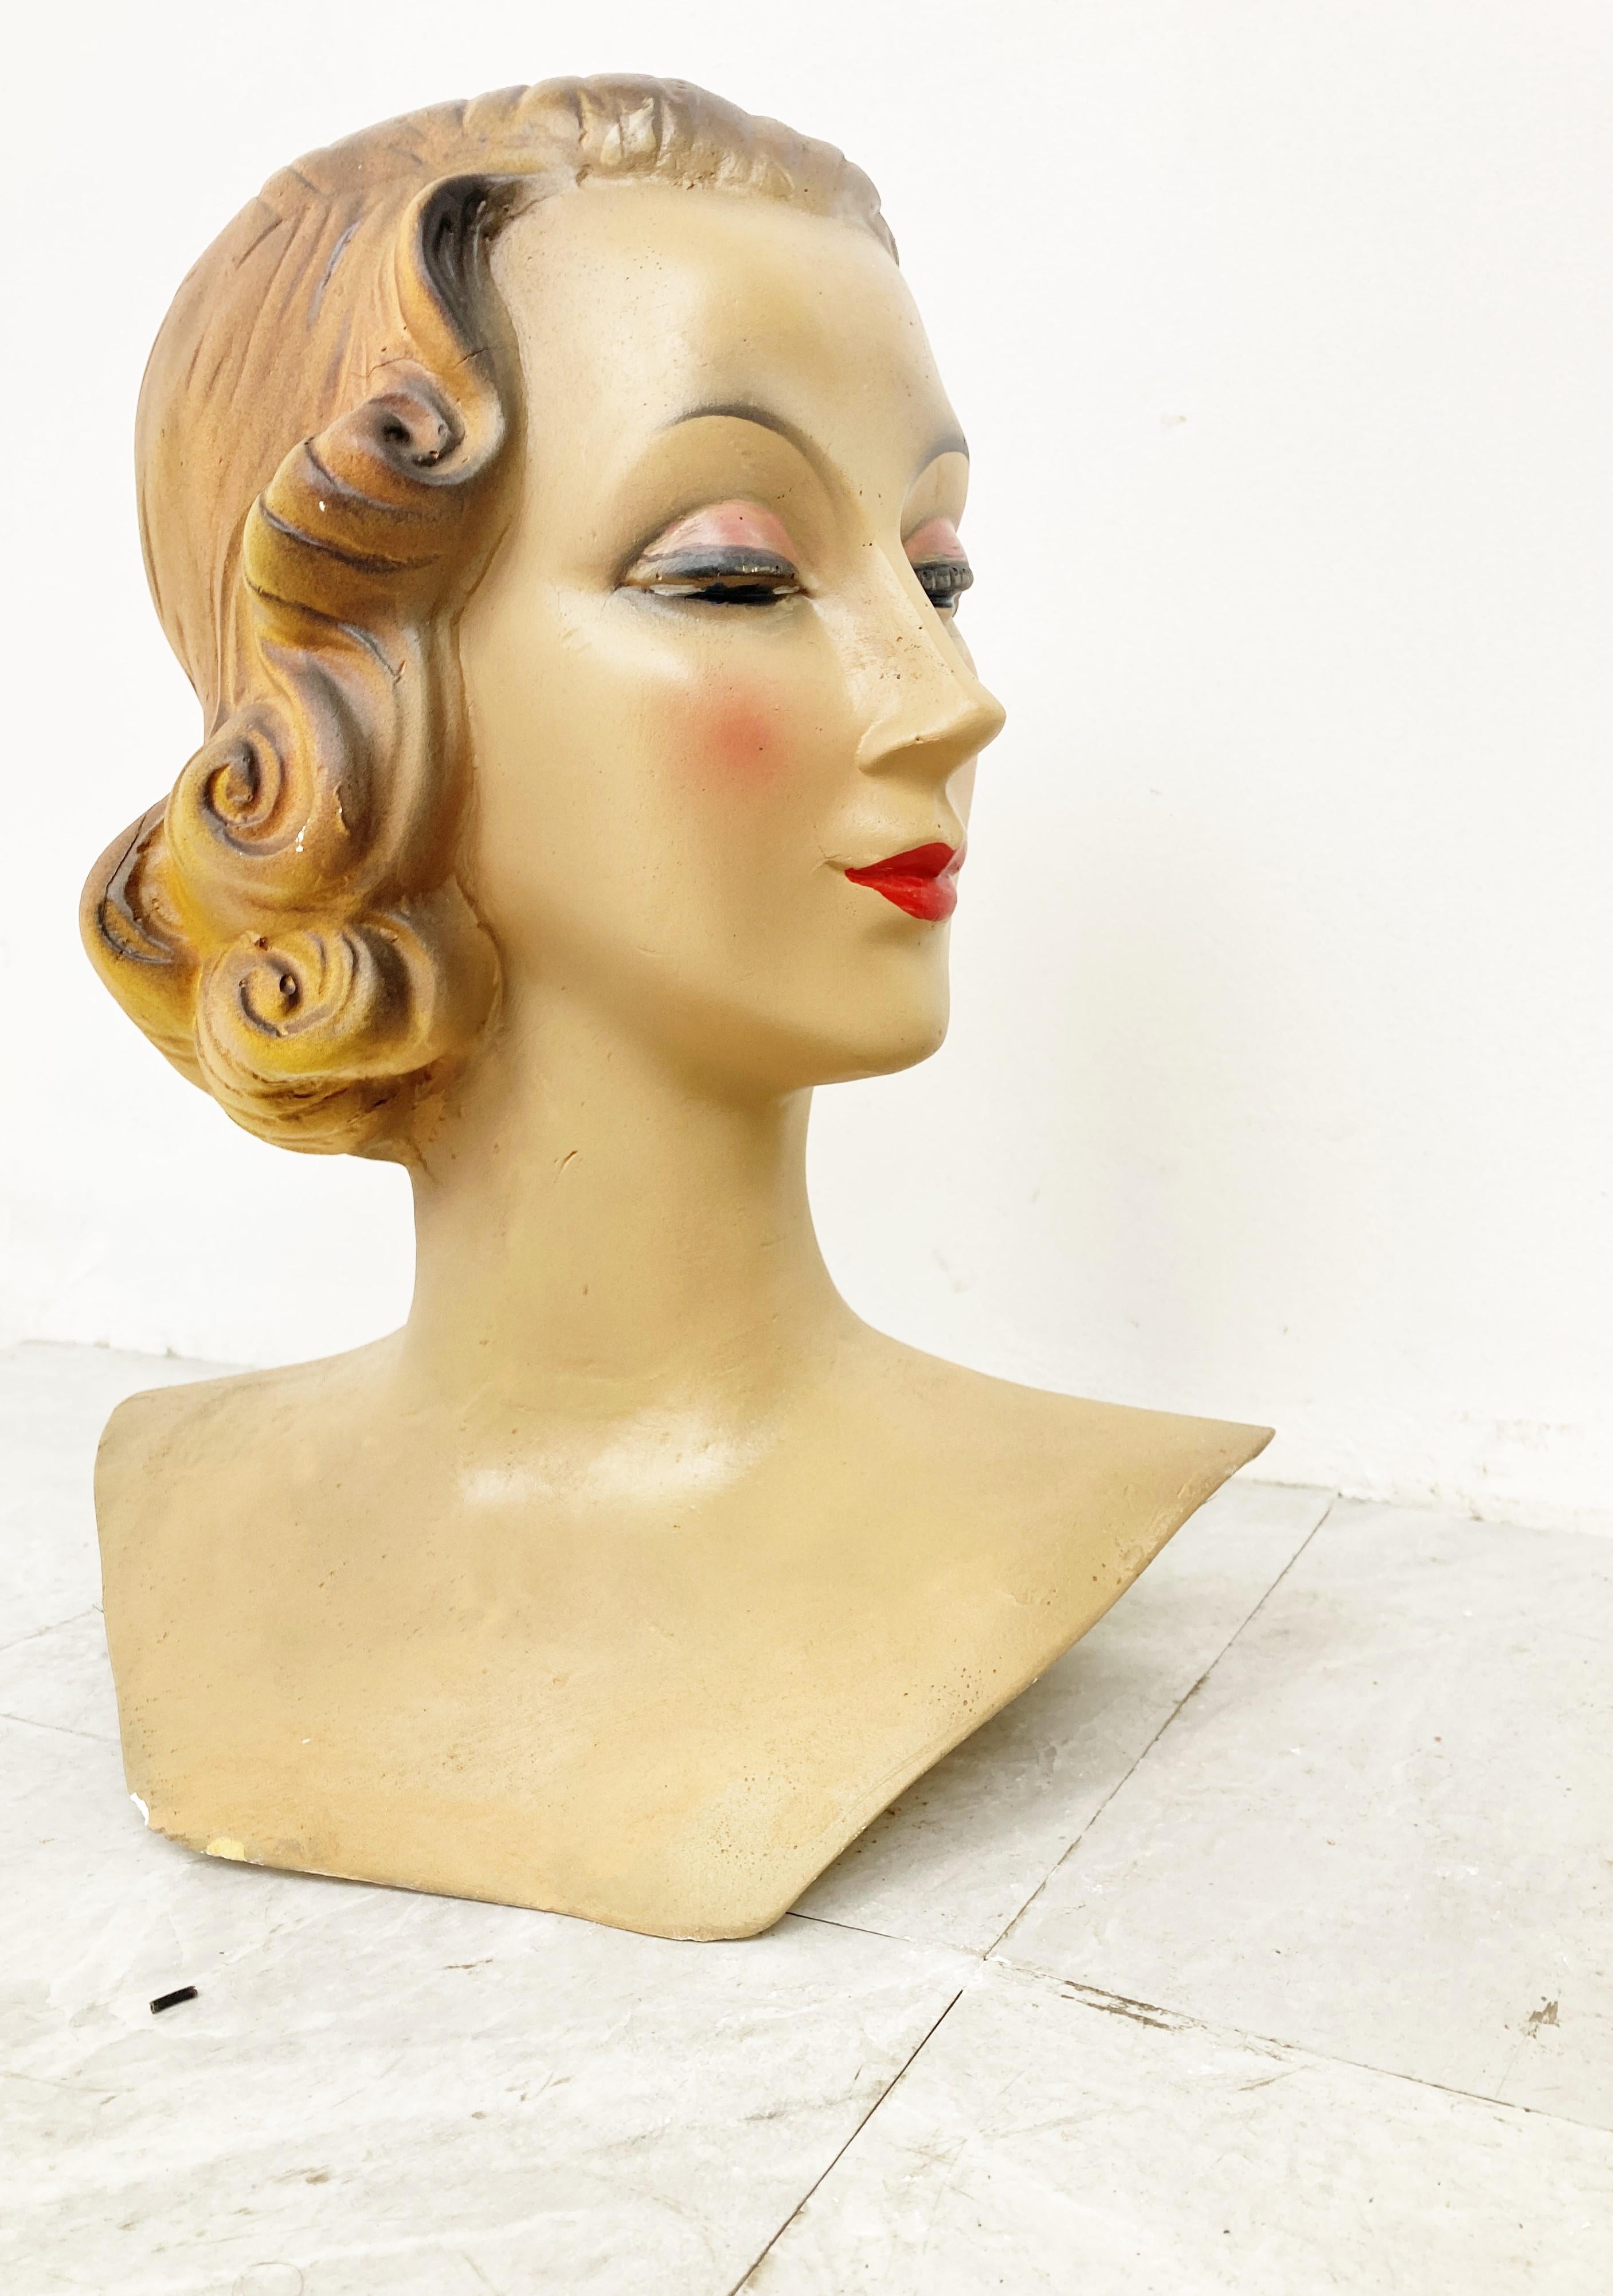 Beautiful female mannequin head made from plaster. 

Typiccal art deco style

Comes from a lot acquired from a clothes shop that stopped activities.

Great decorative item to display glasses, hats,..

France - 1960s

Height: